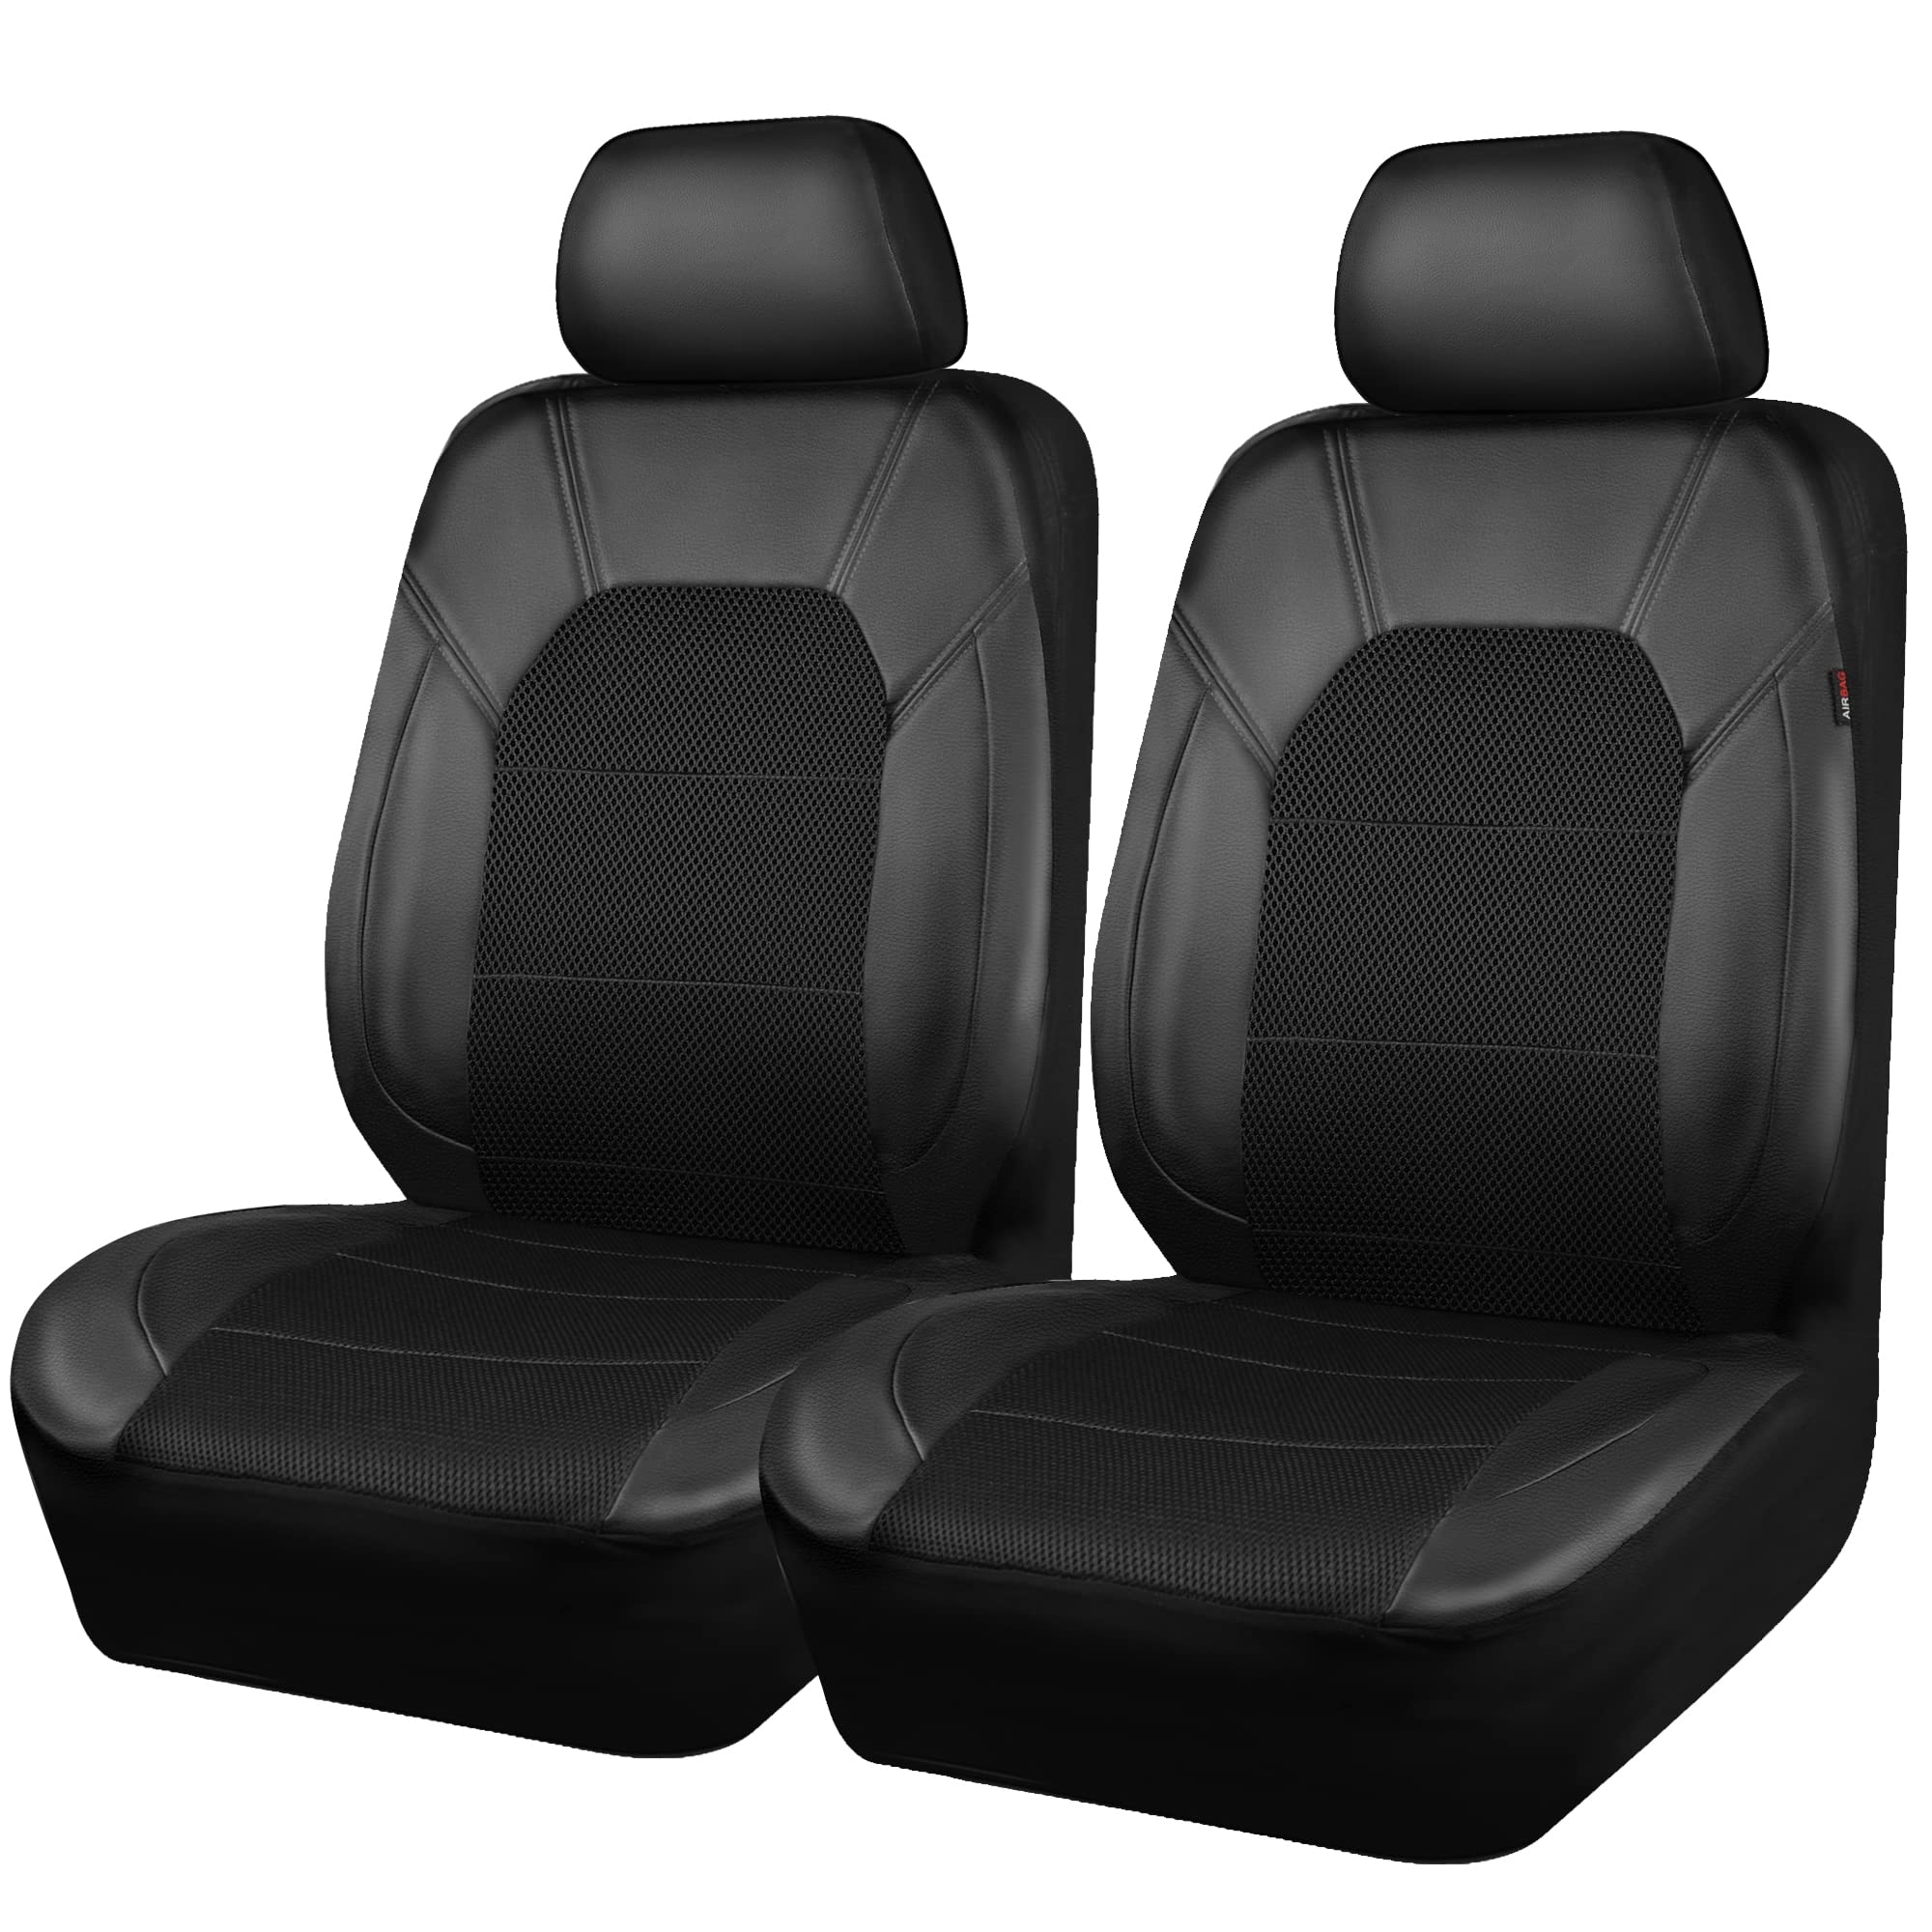 cAR PASS Universal Leather Two Front Seat covers,Sport seat covers fits Most cars, SUVs, Trucks, and Vans Airbag compatible (Bla